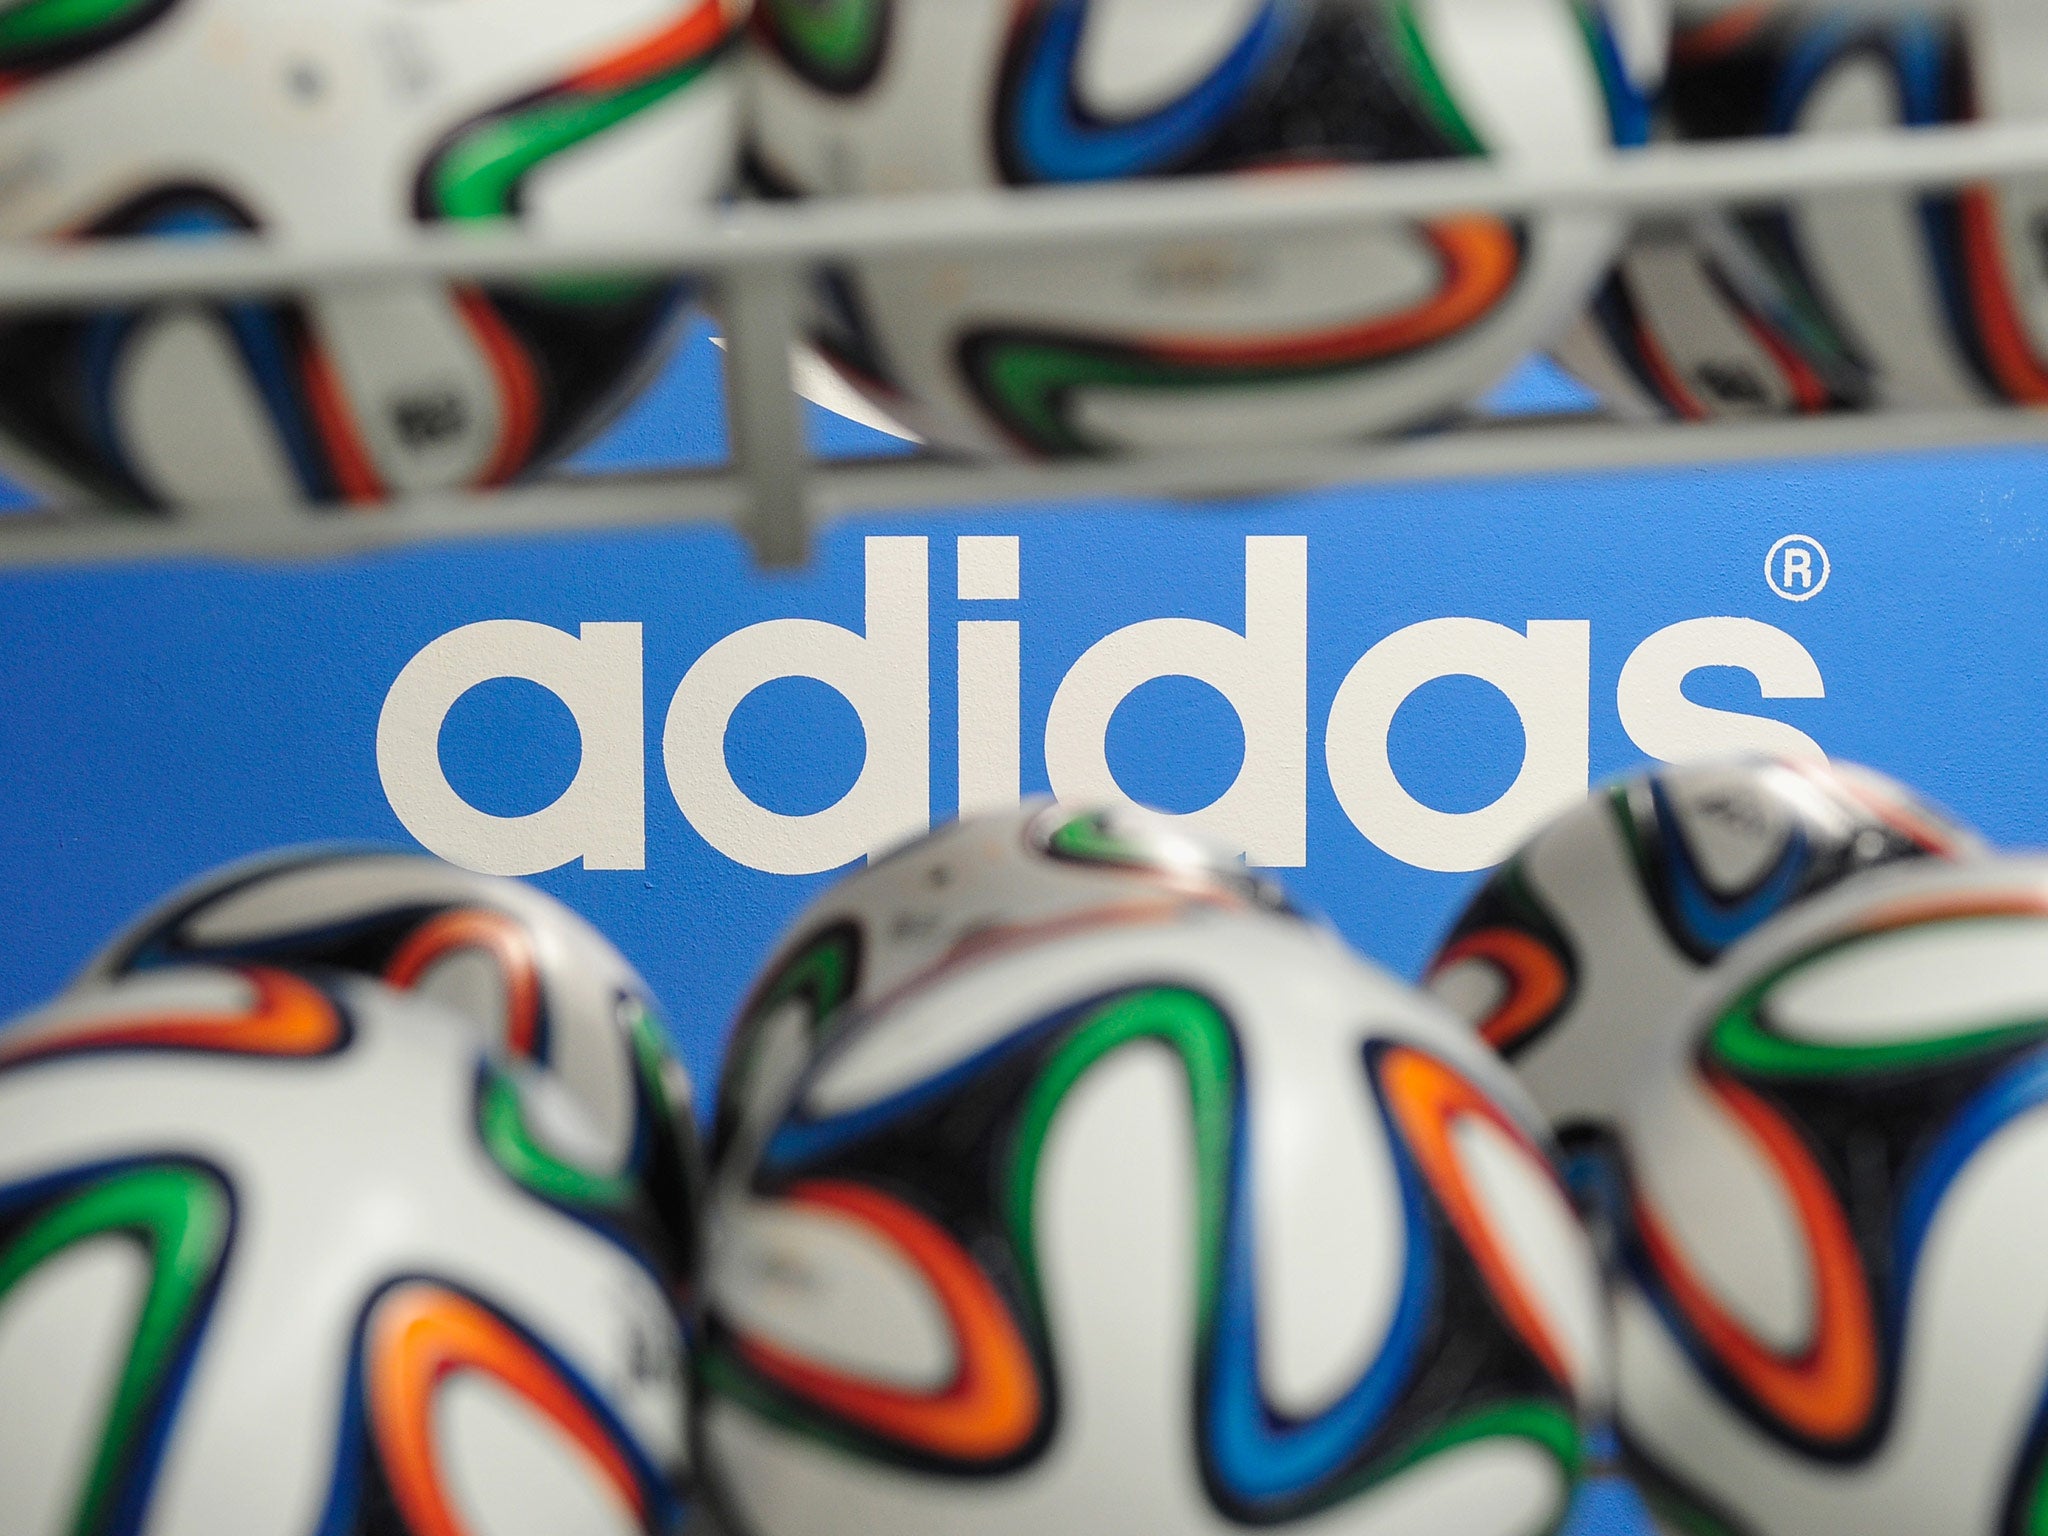 https://static.independent.co.uk/s3fs-public/thumbnails/image/2014/02/26/11/Brazuca-match-balls-for-the.jpg